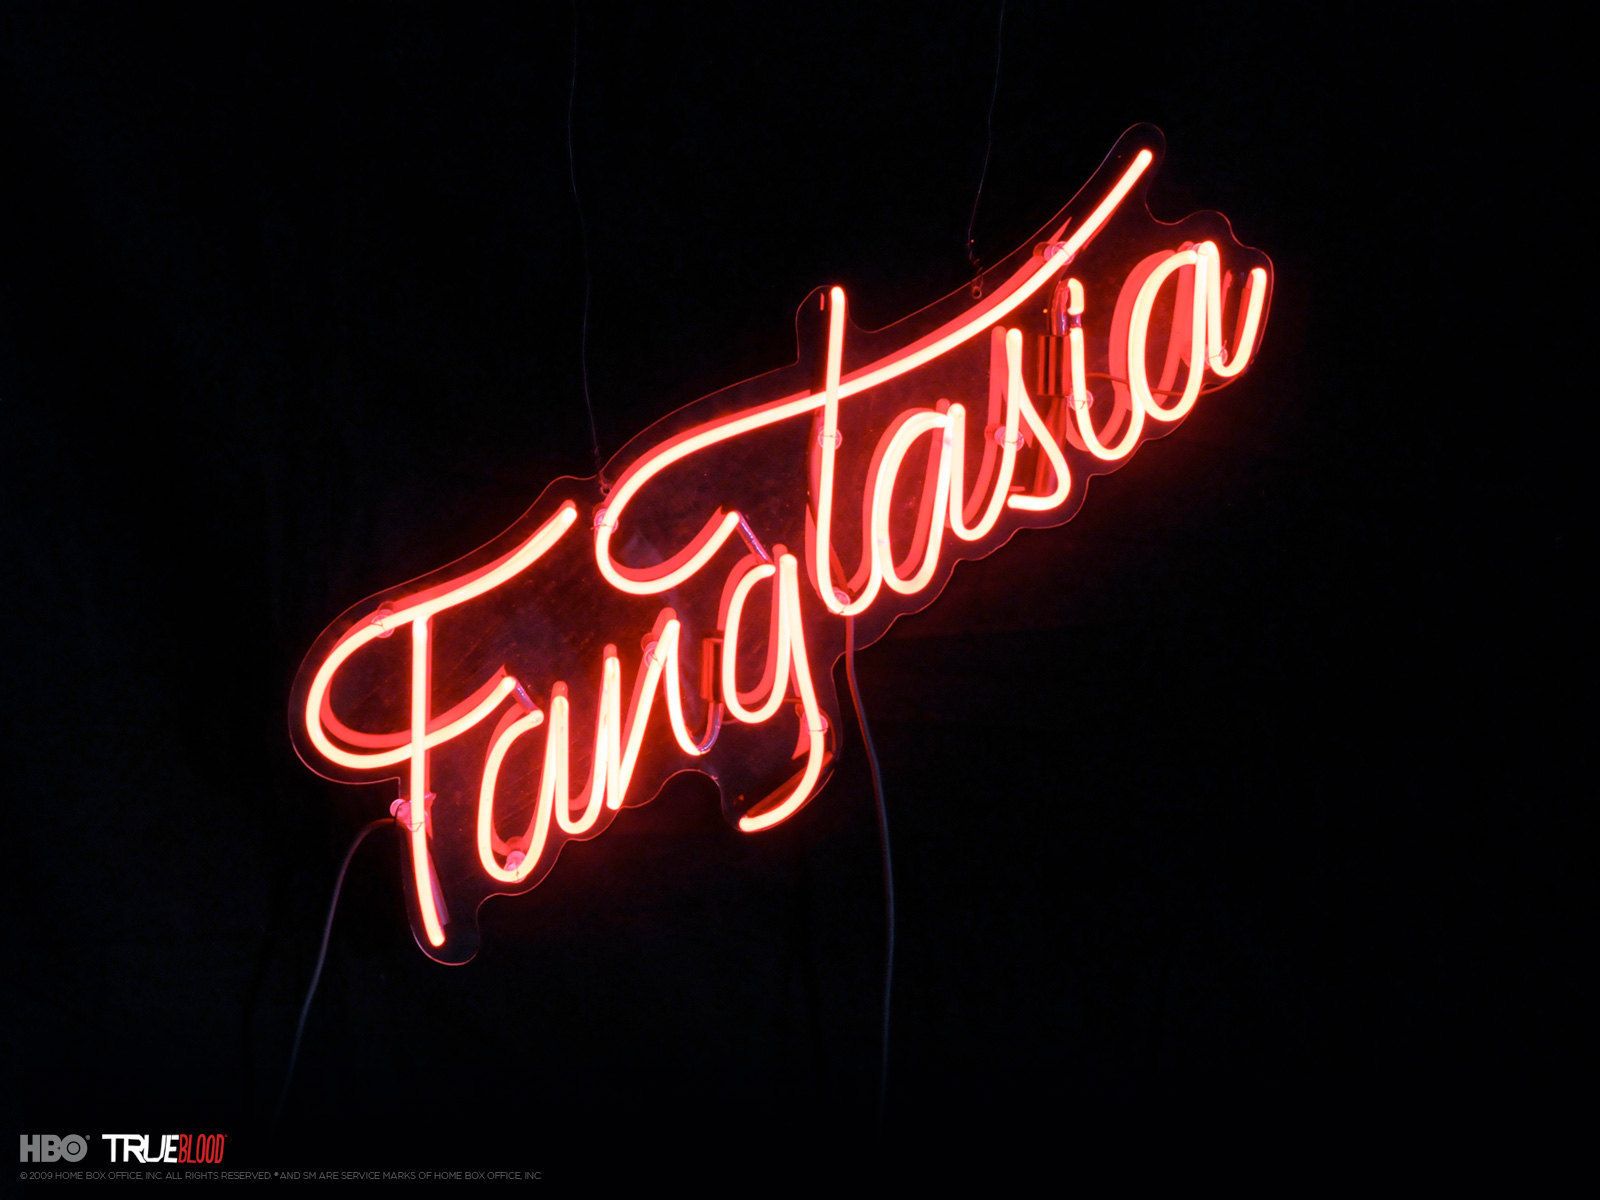 A neon sign that says fantasia - Blood